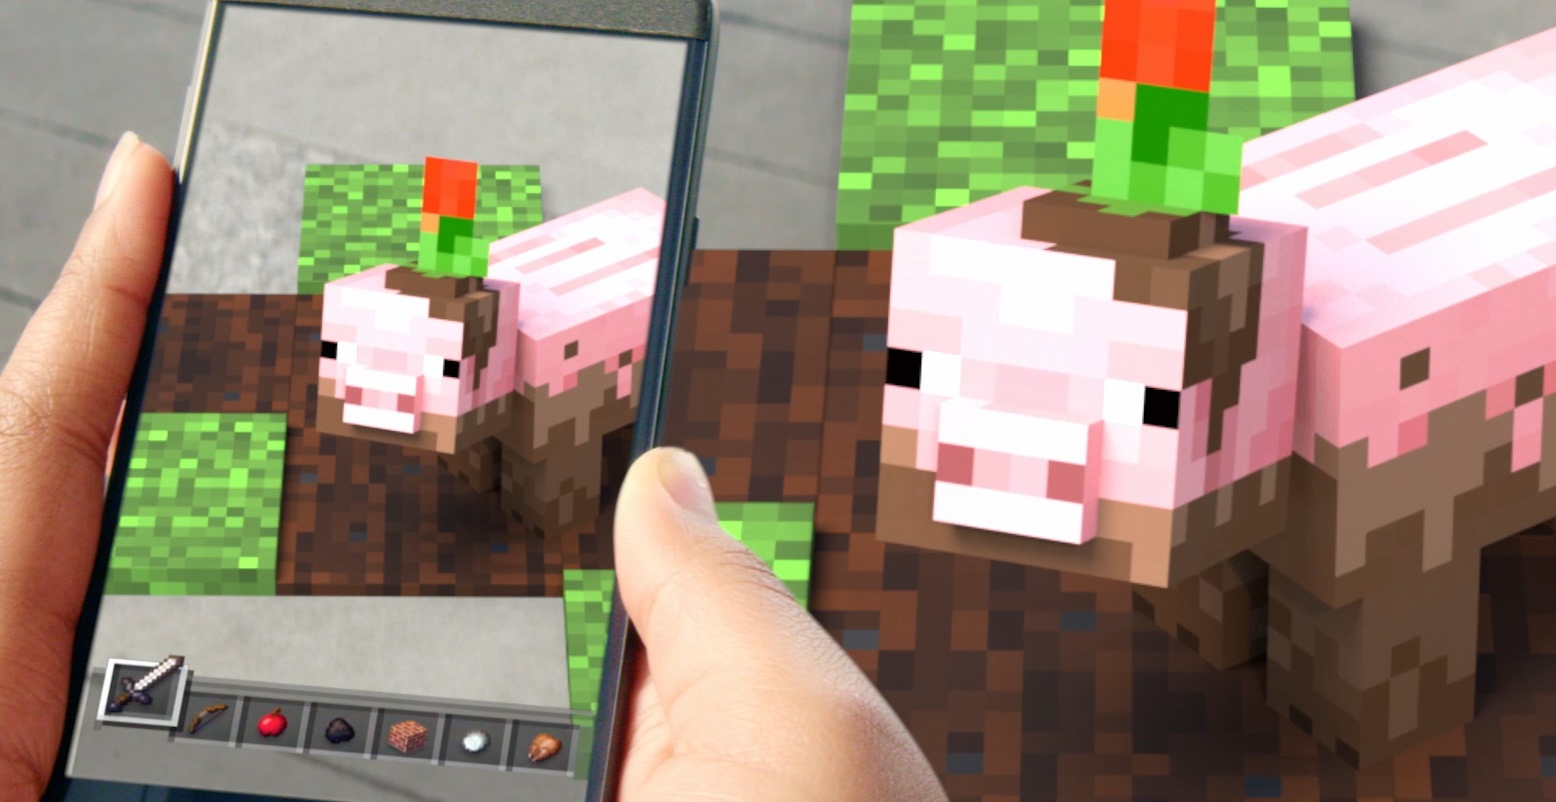 A pig from Minecraft showing in the real world via augmented reality.